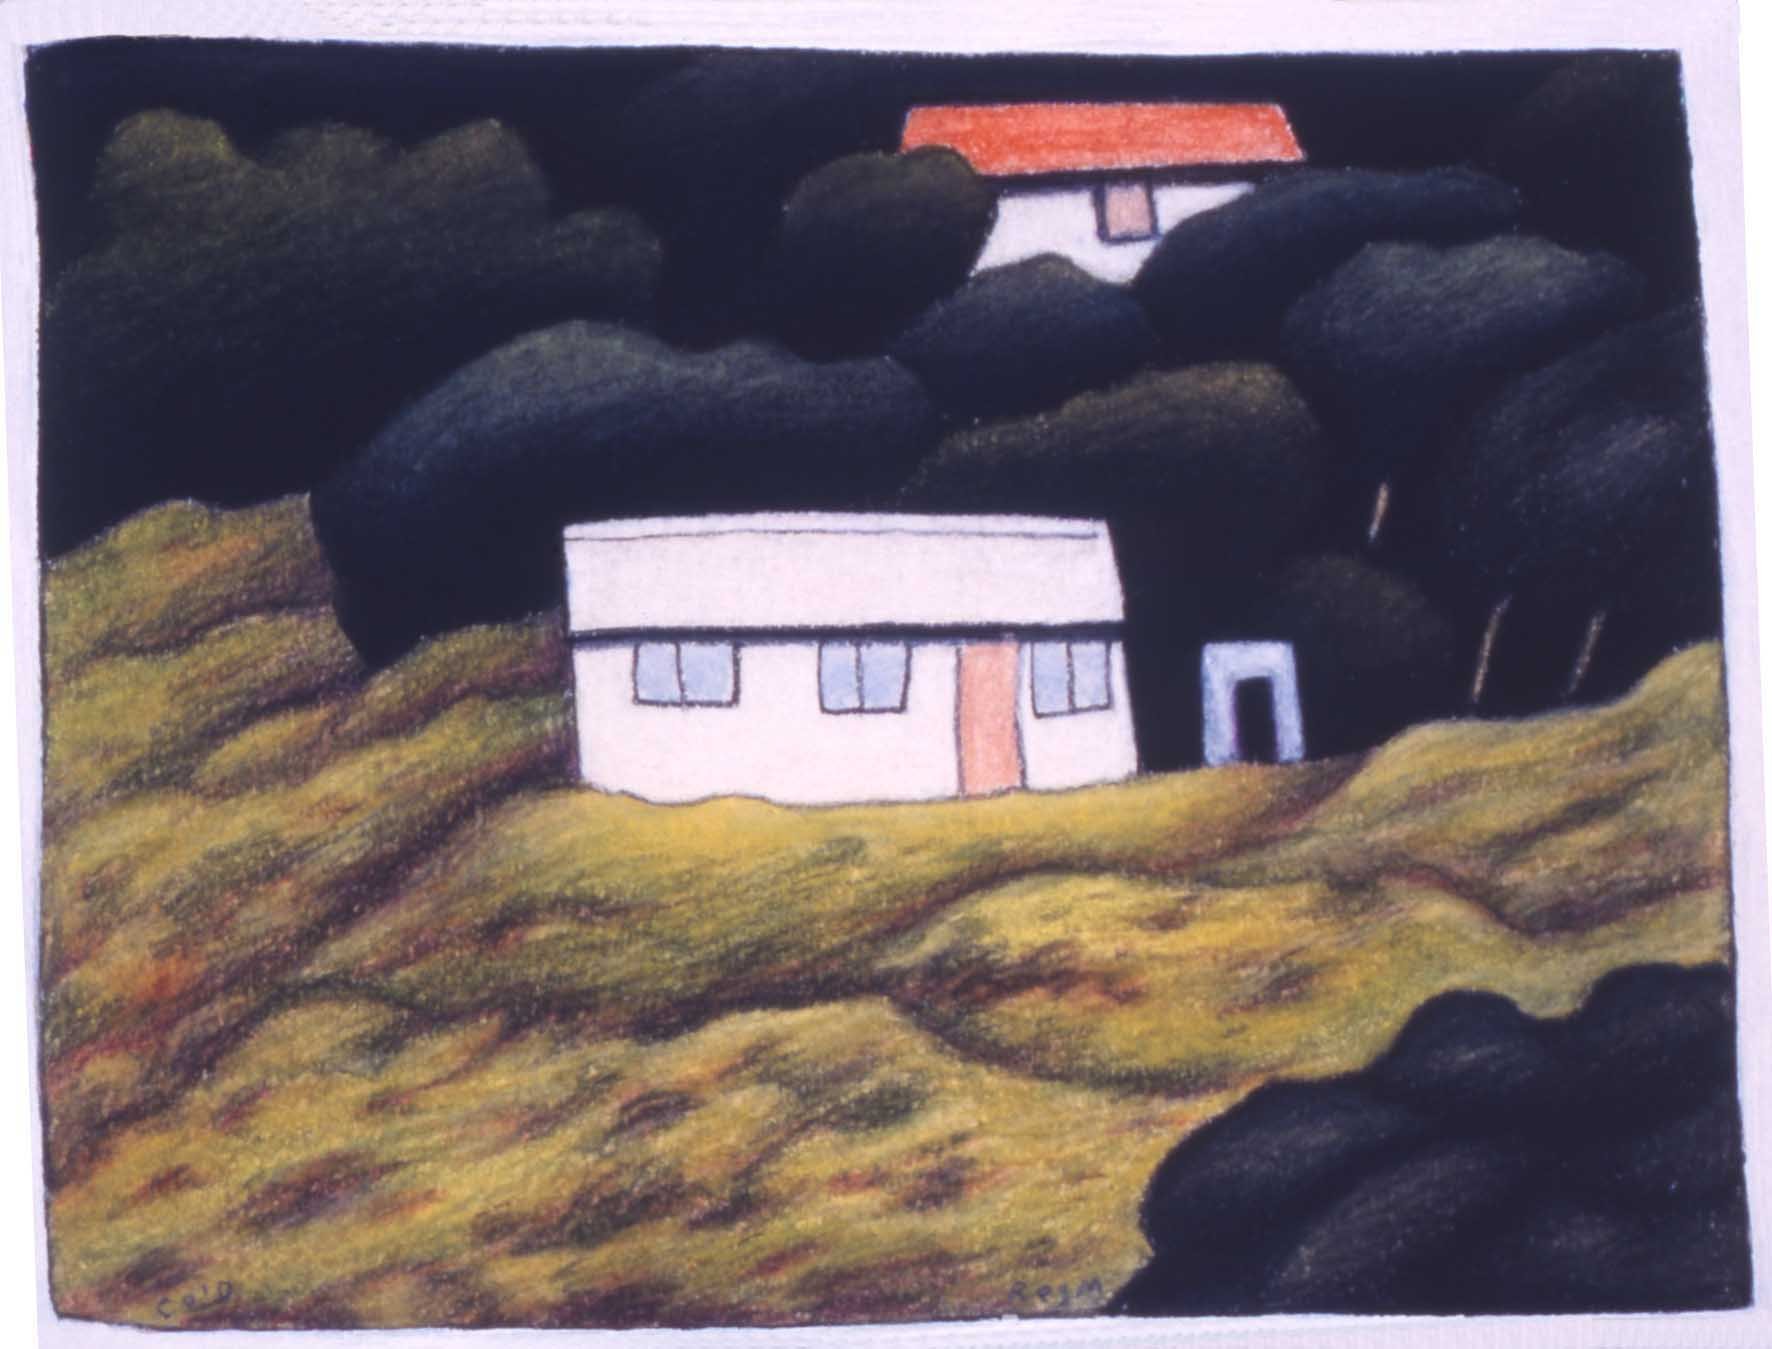 Gloaming, Era, 17 x 21cm, coloured pencil and charcoal on paper, 1991.jpg